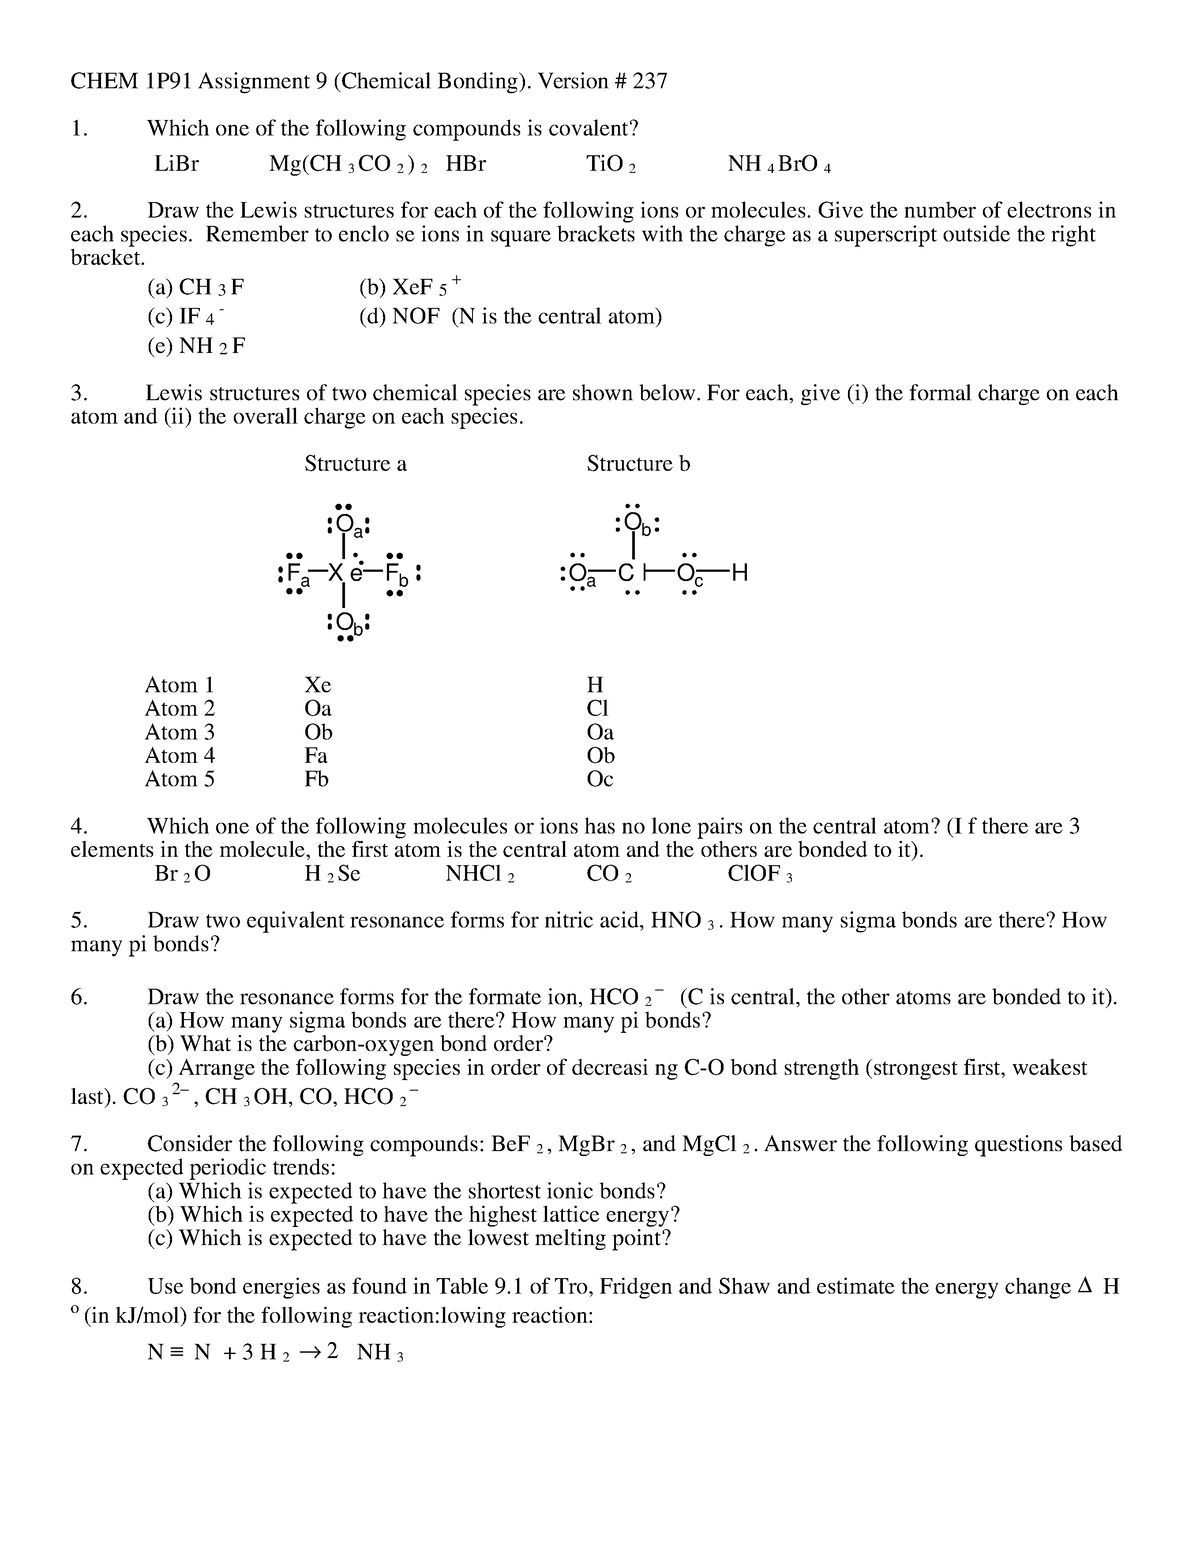 nof lewis structure with charges